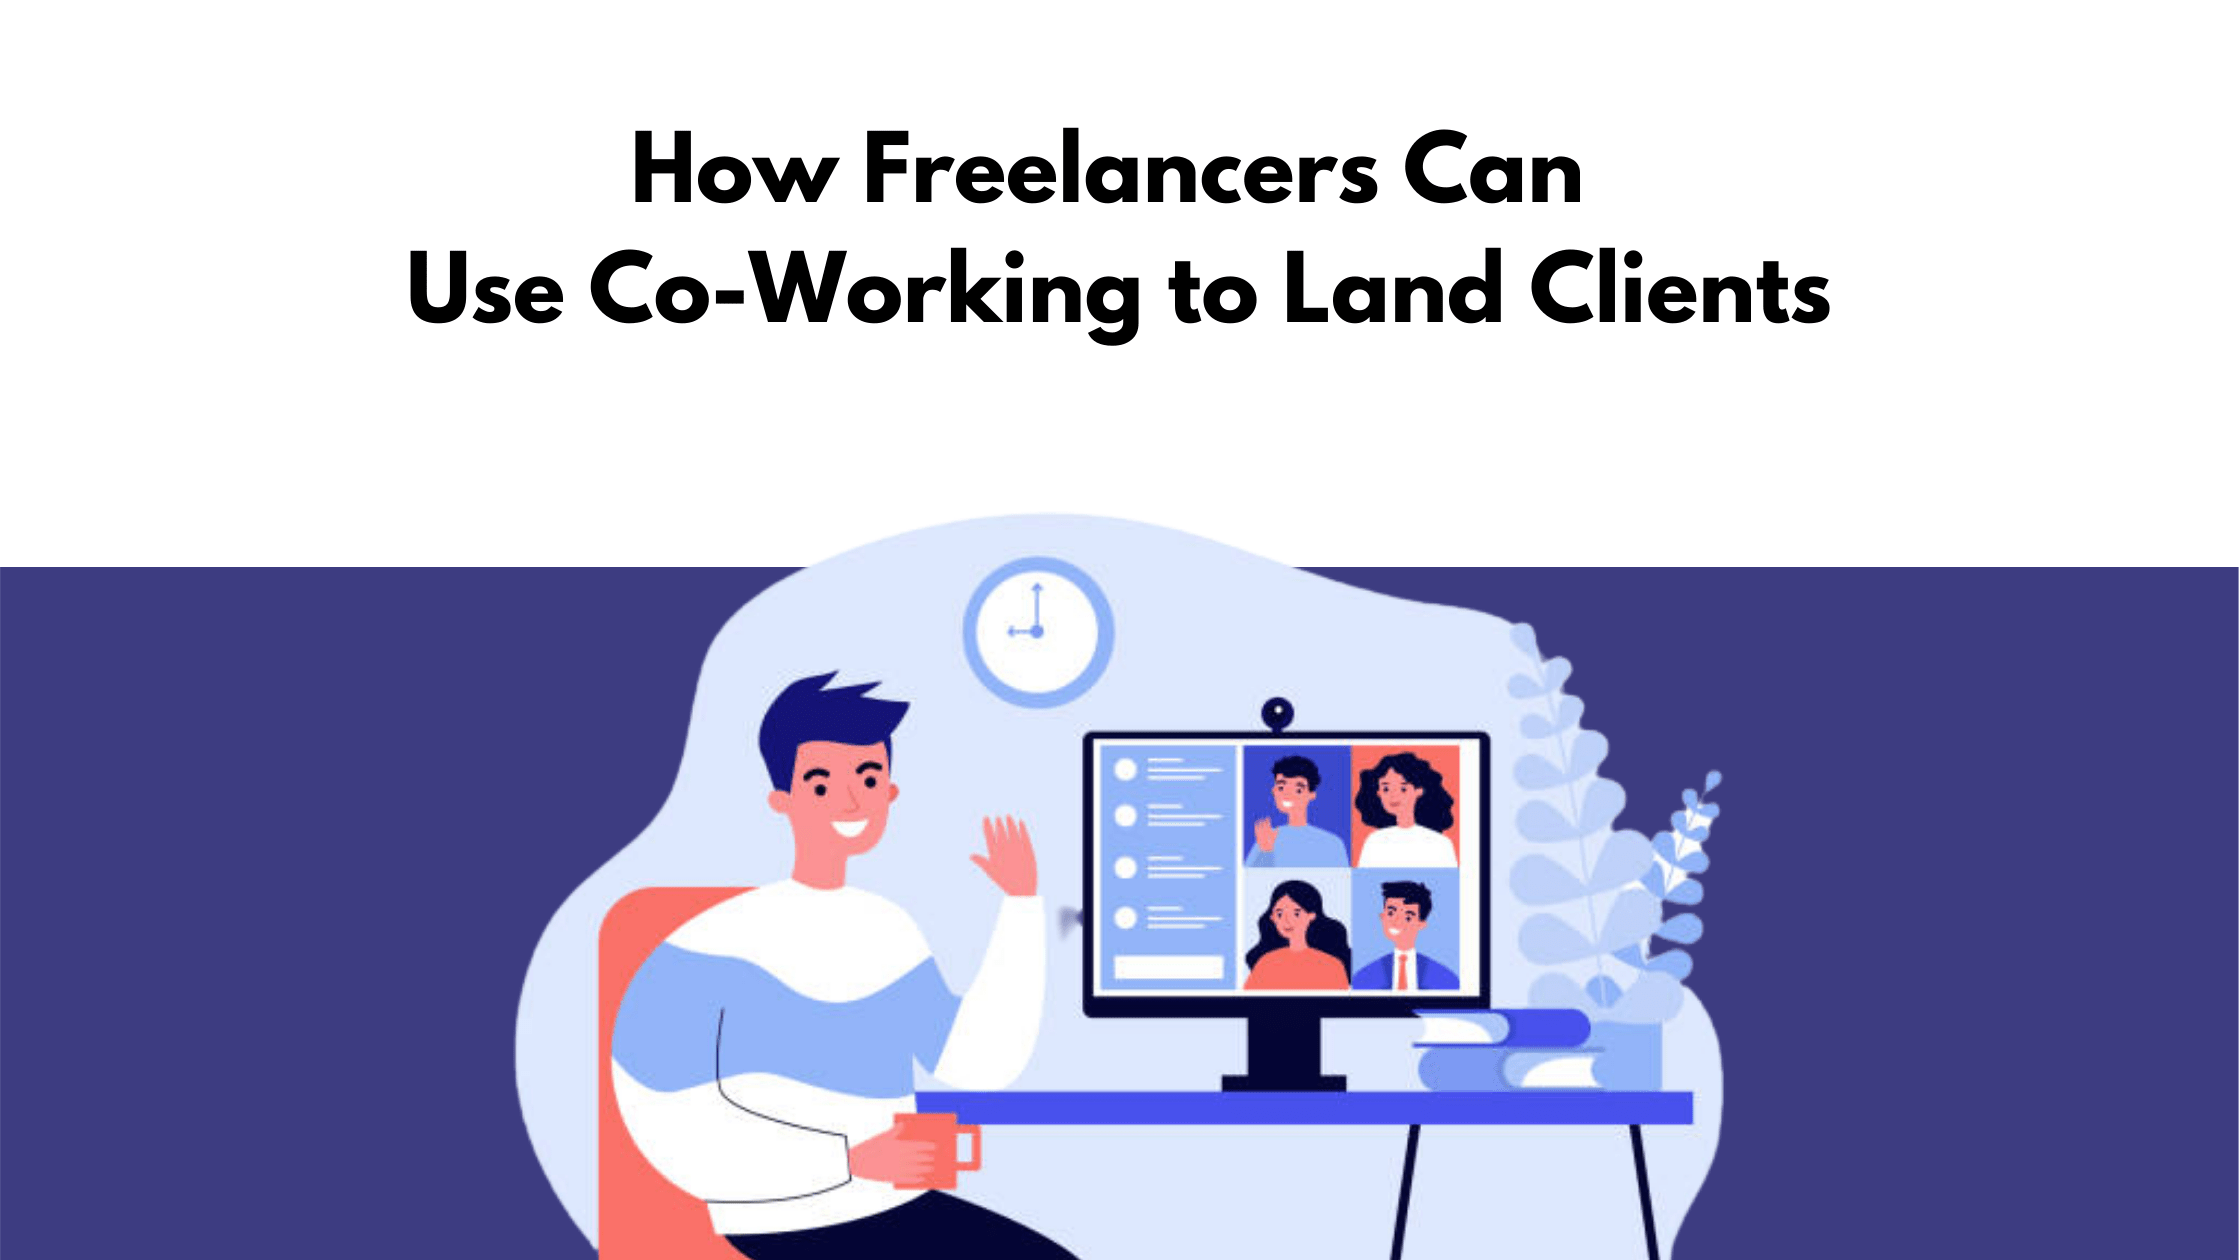 How Freelancers Can Use Co-Working to Land Clients